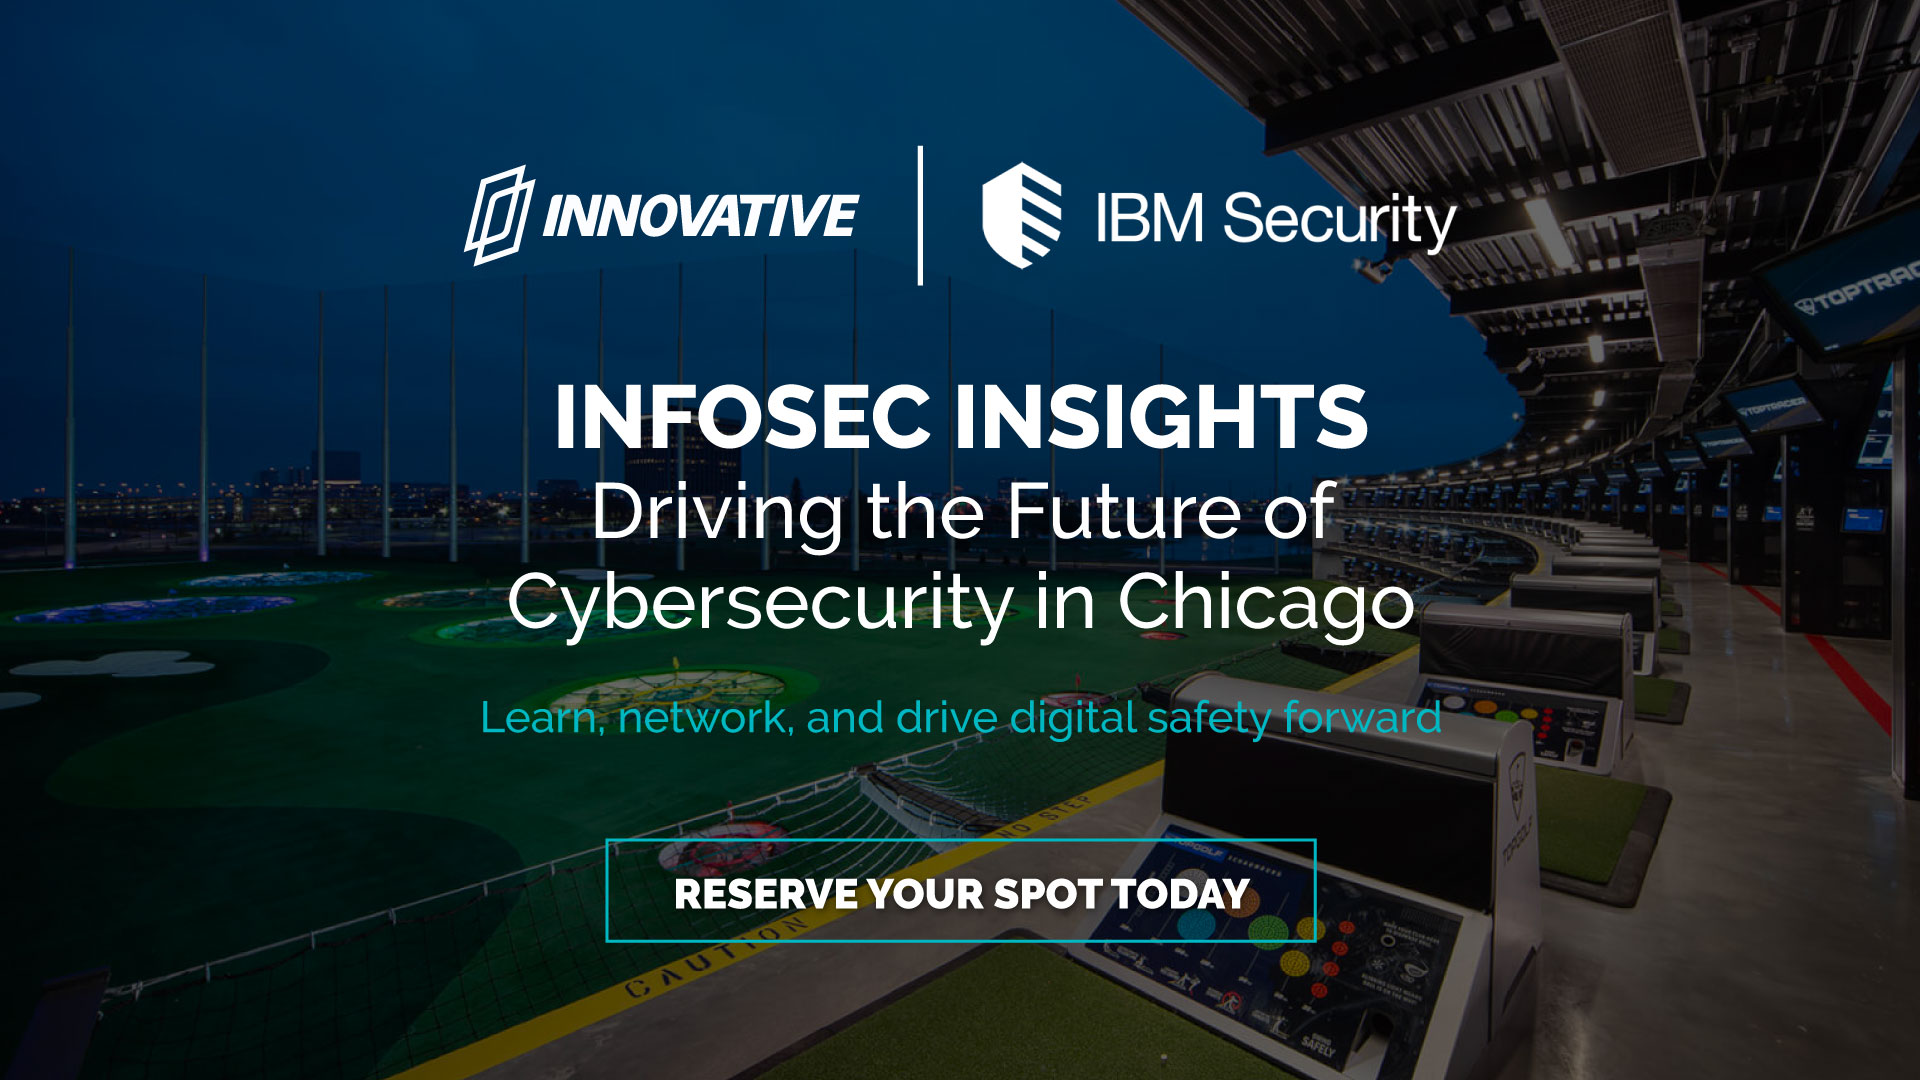 Infosec Insights: Driving the Future of Cybersecurity in Chicago